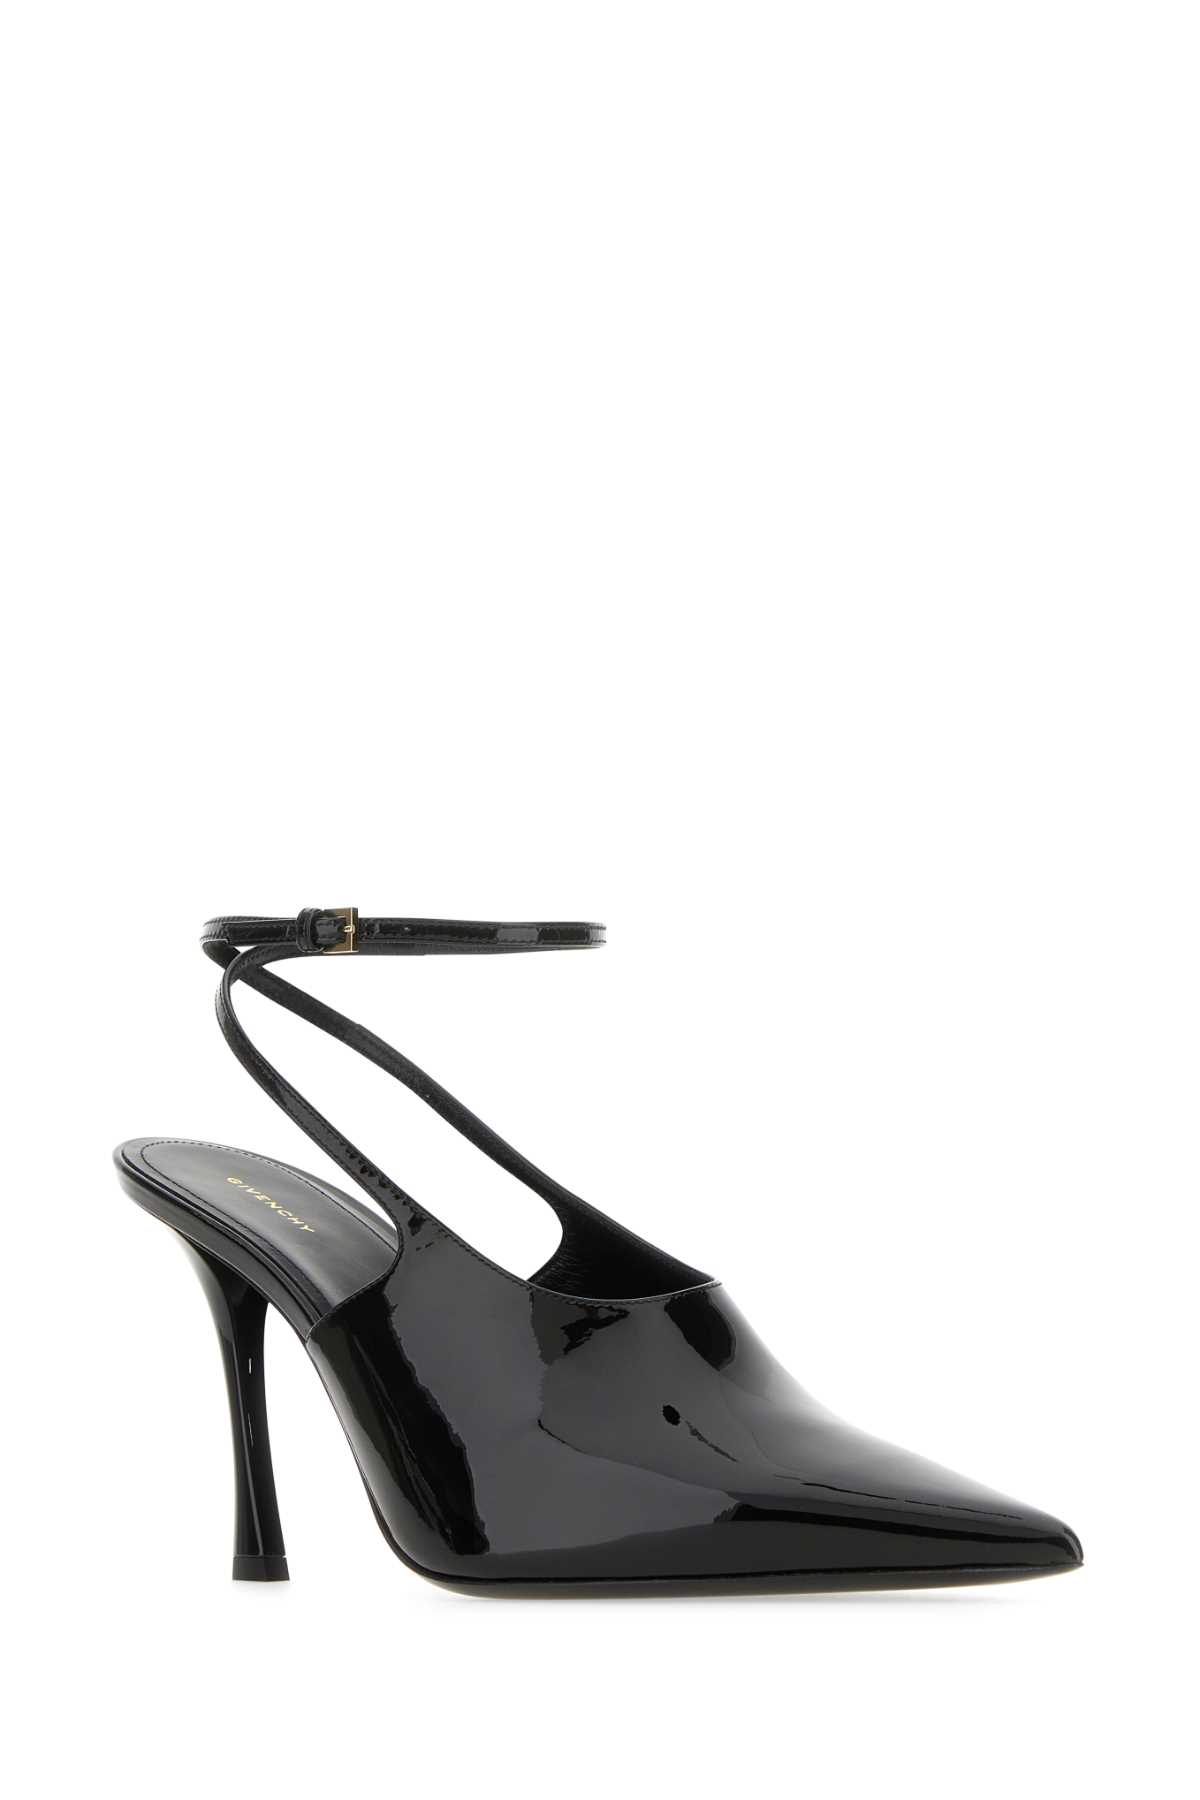 Givenchy Black Leather Show Pumps